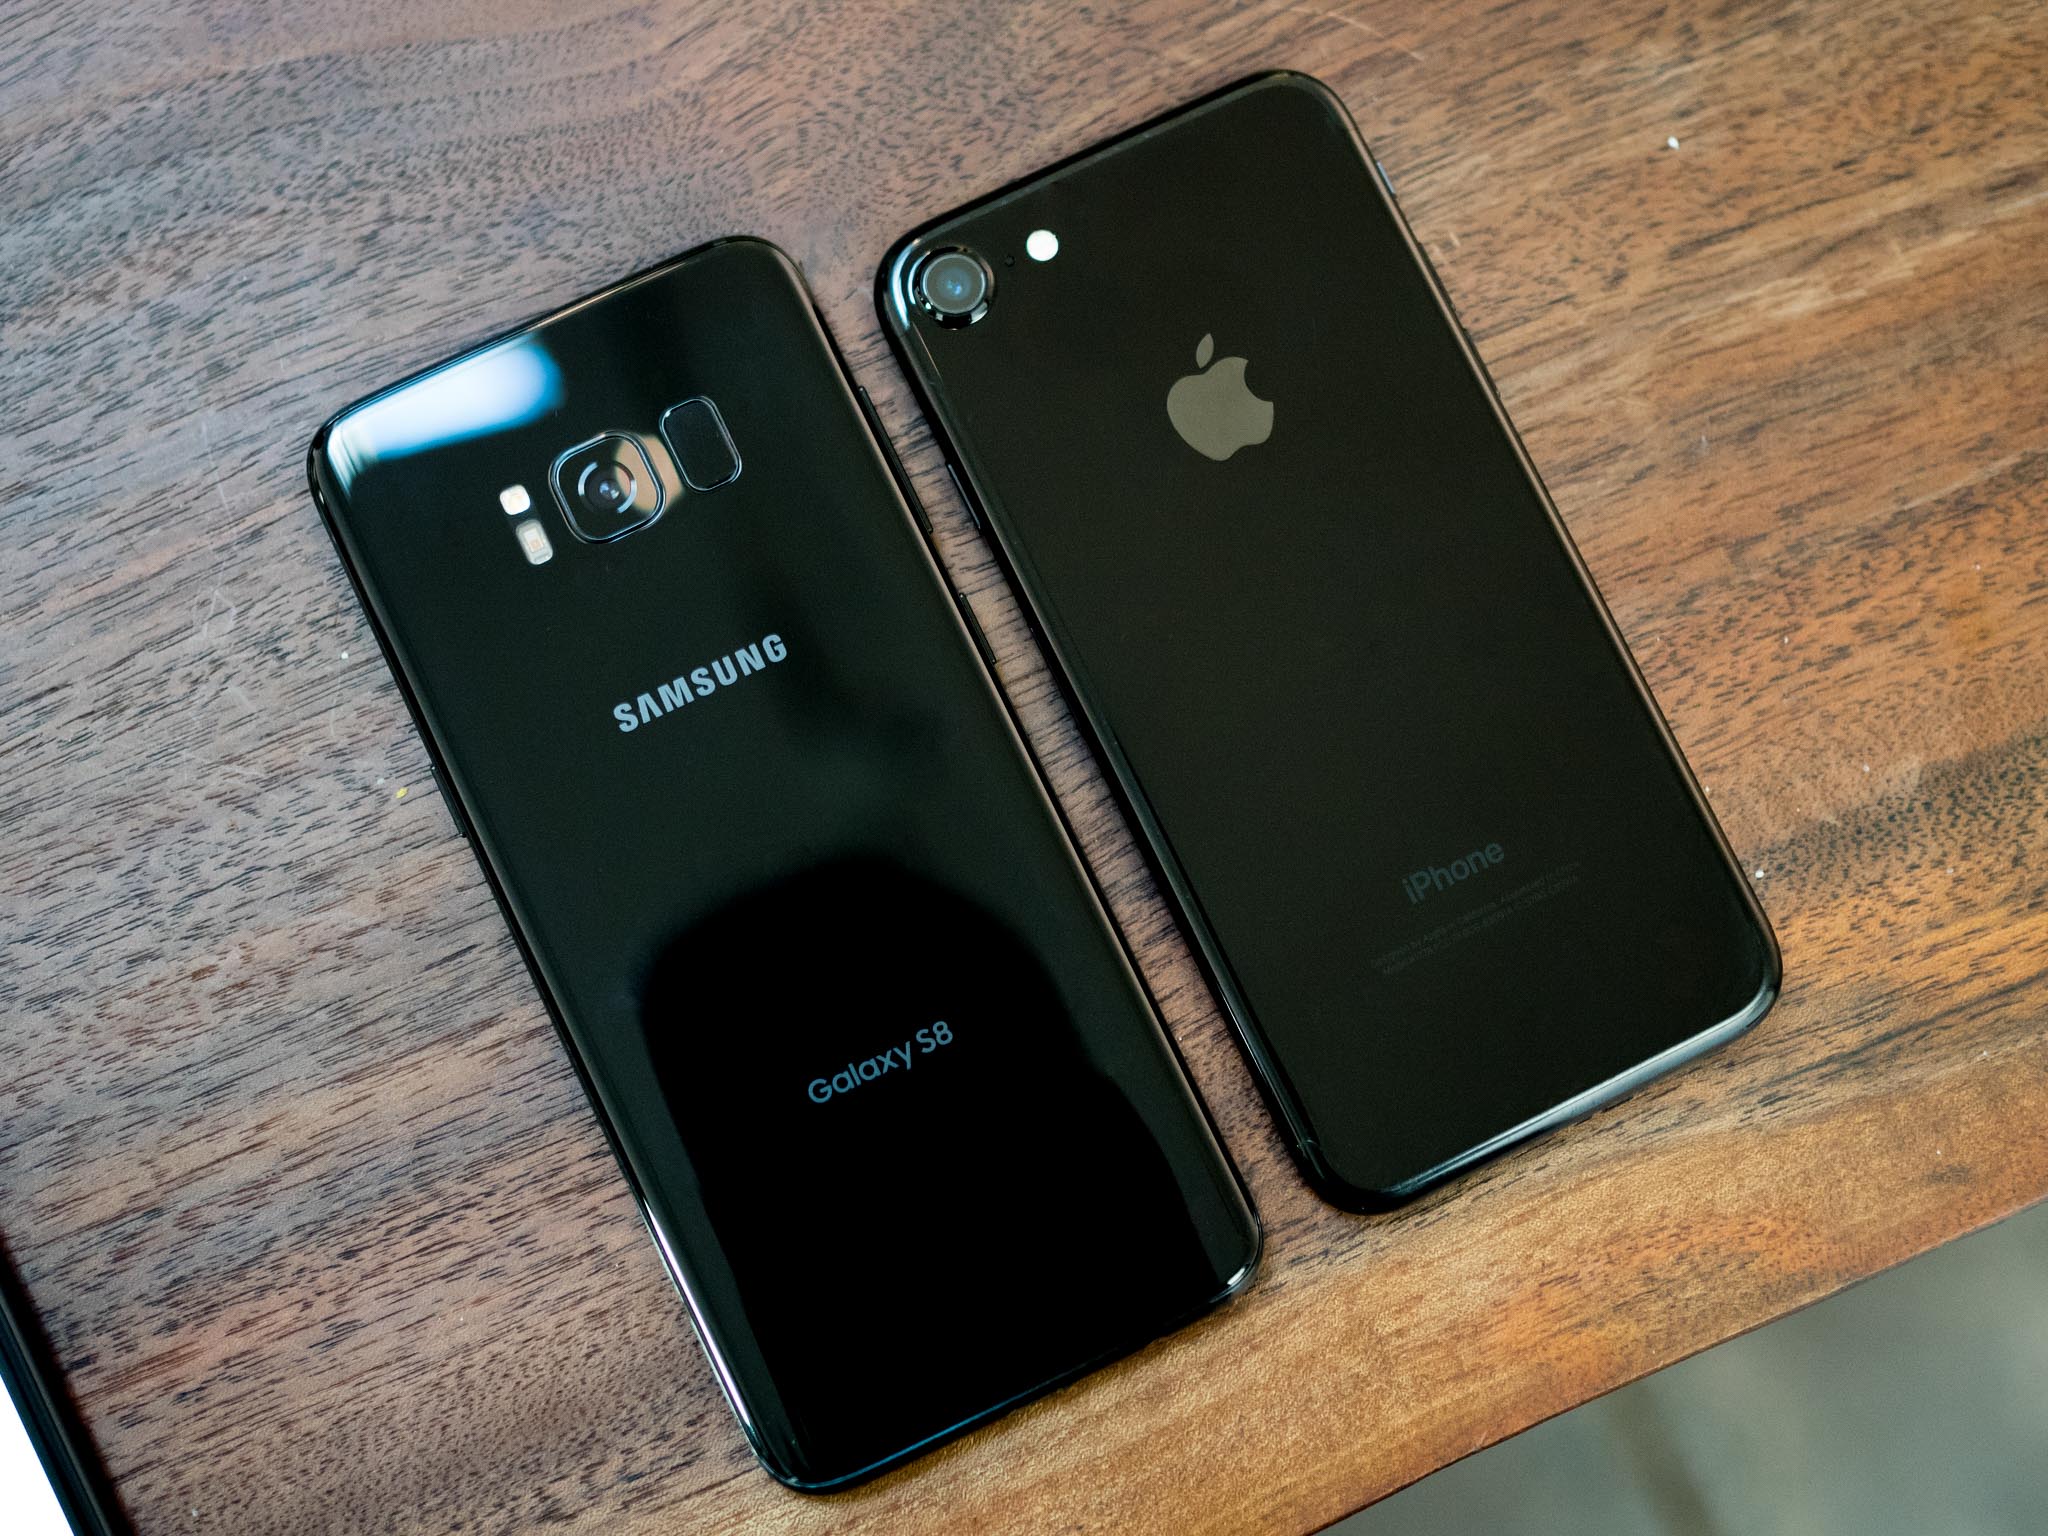 Samsung Galaxy S8 news - iPhone 8 rival could come in 